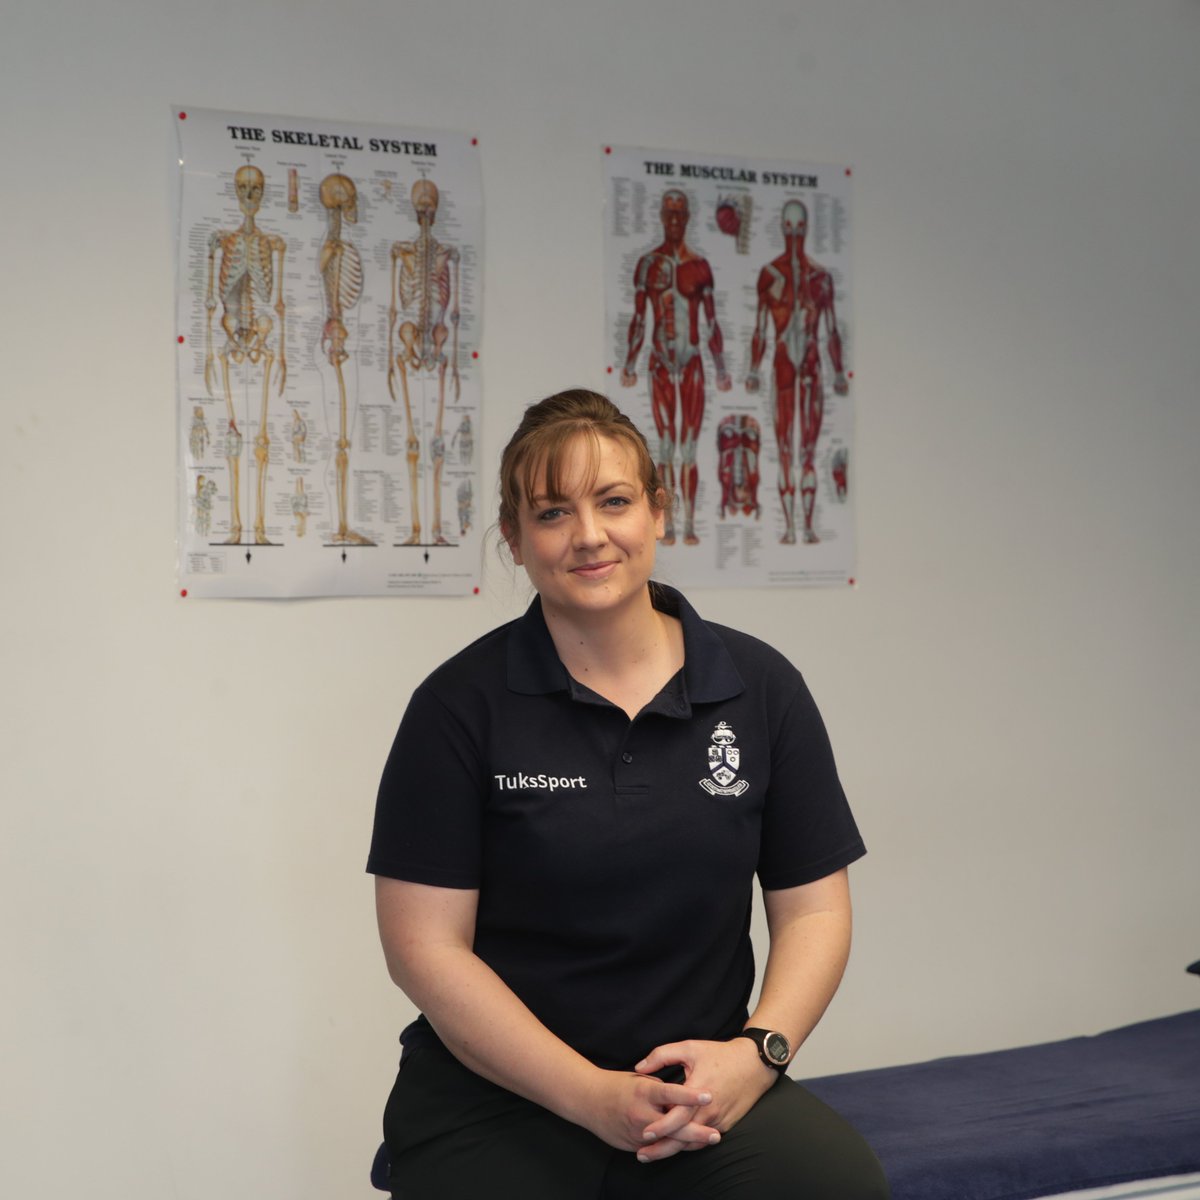 #HighPerformanceCentre: #ProudlyUP 

Sanet van Zyl of SEMLI - Sport, Exercise Medicine and Lifestyle Institute based at the hpc, was a Physiotherapist for @USSAstudent at the recent 2022 CUCSA Games in Malawi.

💬 'Our job never becomes stale.'

[Photo credit: #regcaldecott]